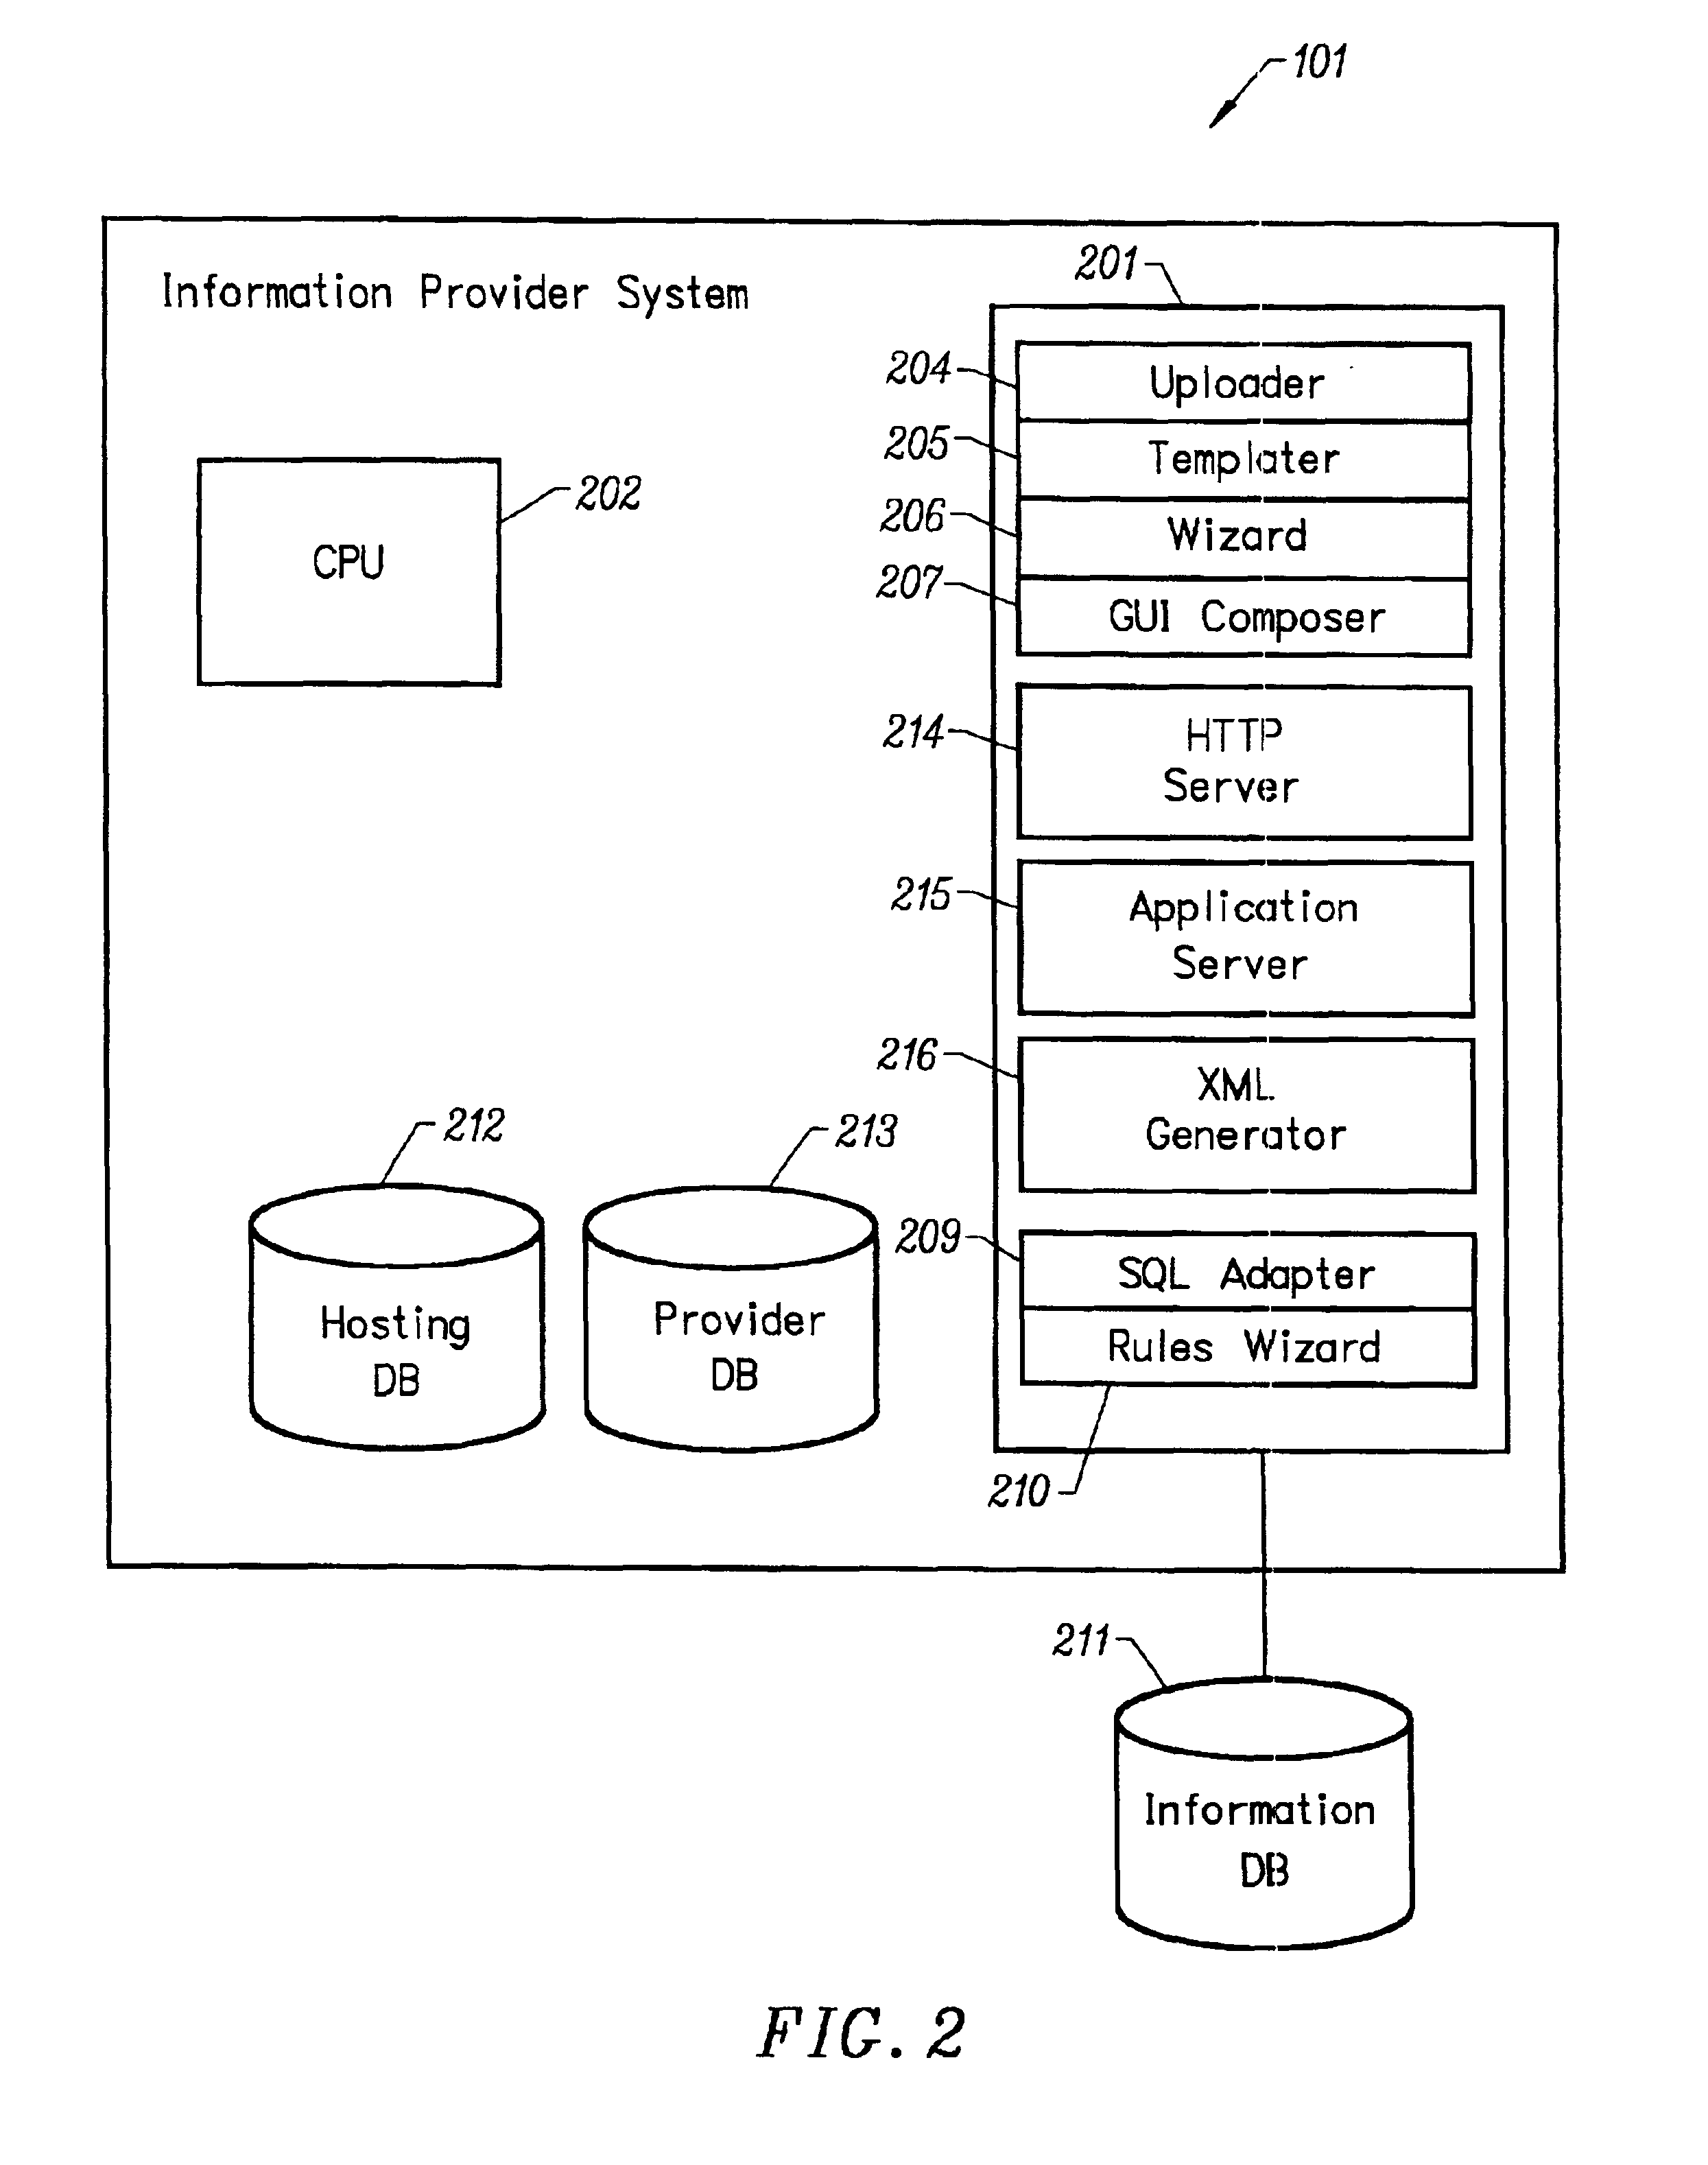 Apparatus and method for communicating information to portable computing devices